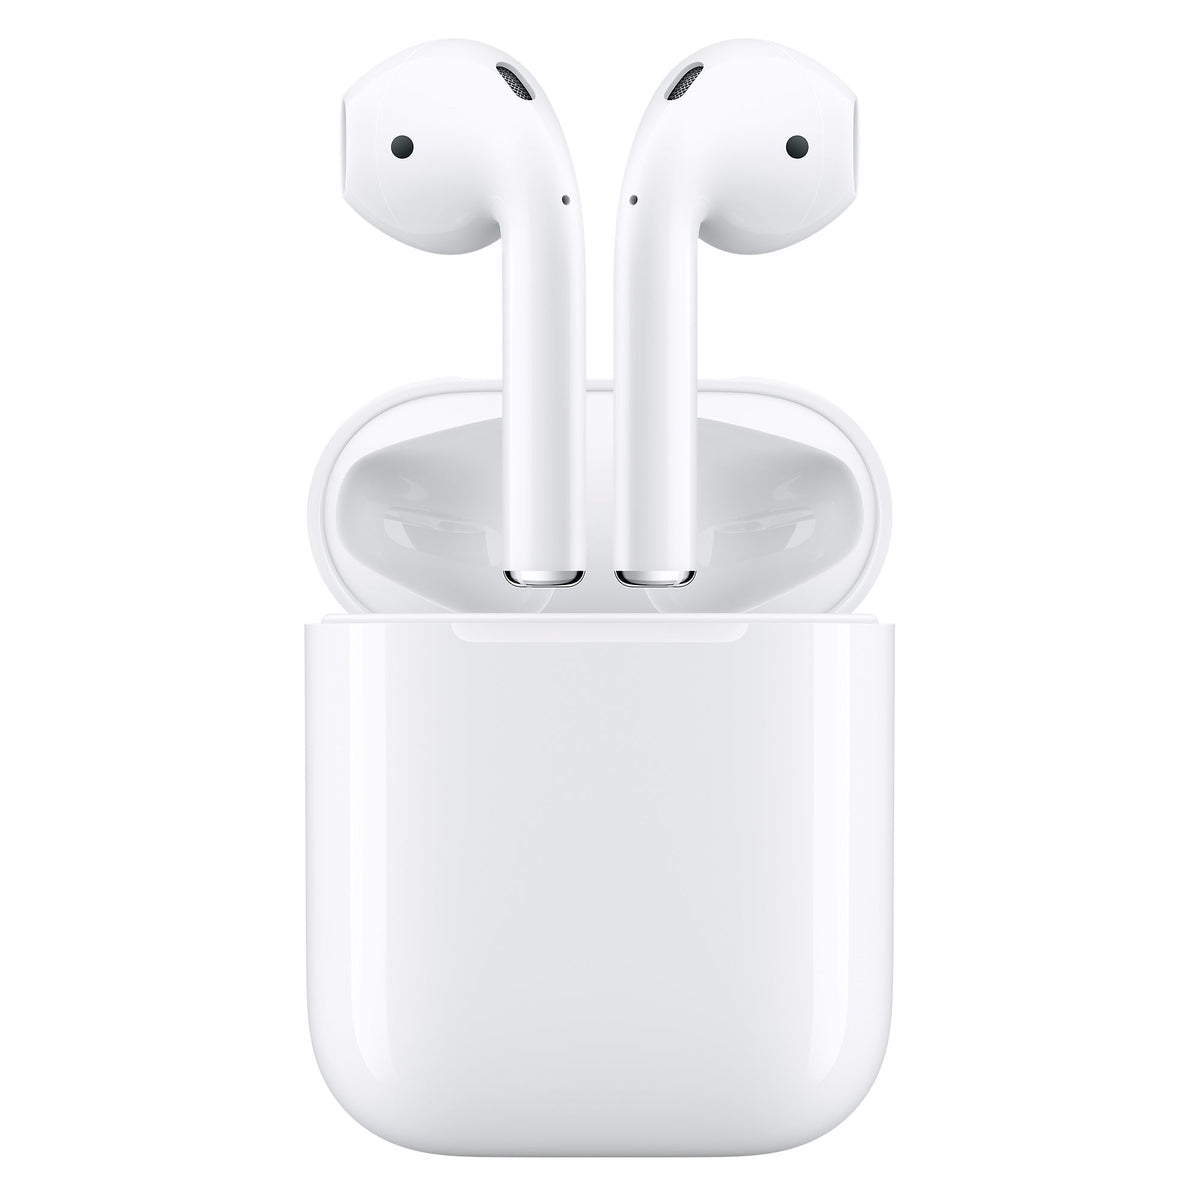 Apple AirPods (2nd Generation) with Lightning Charging Case - Good Condition